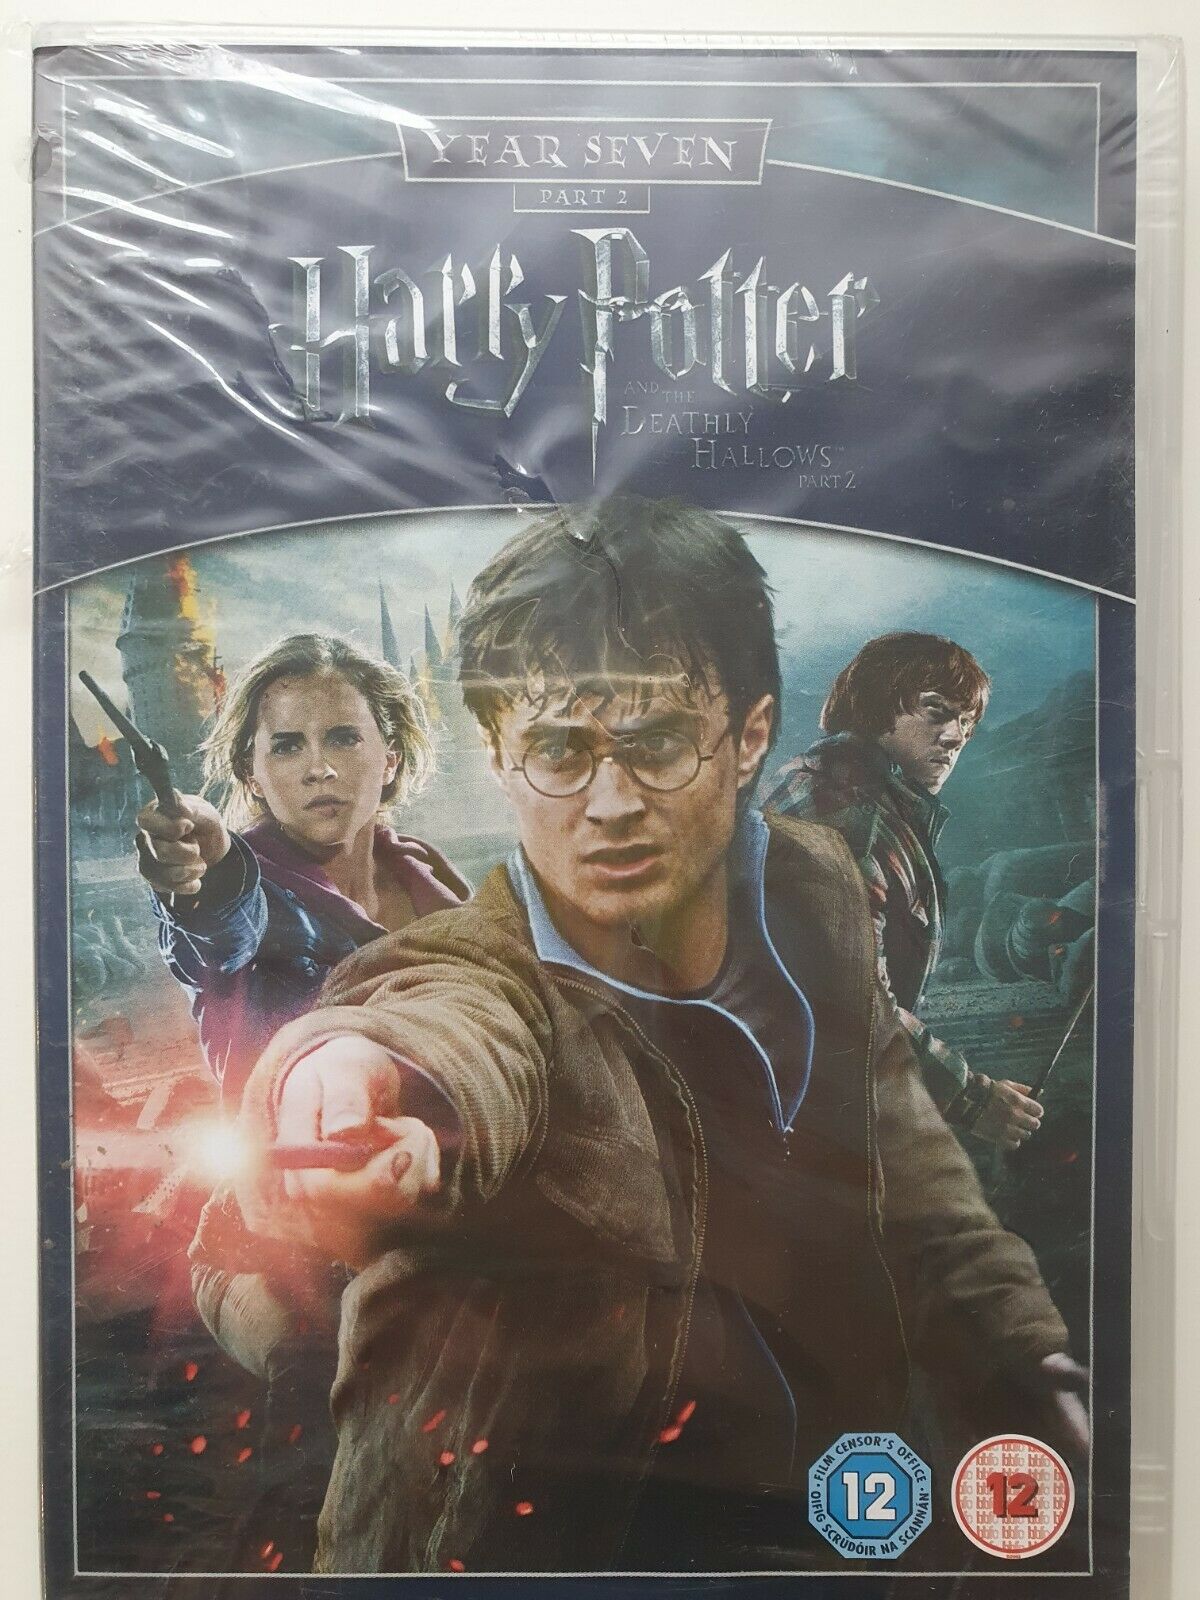 5051892073431 Harry Potter and the Deathly Hallows - Year Seven - Part 2 DVD 2011